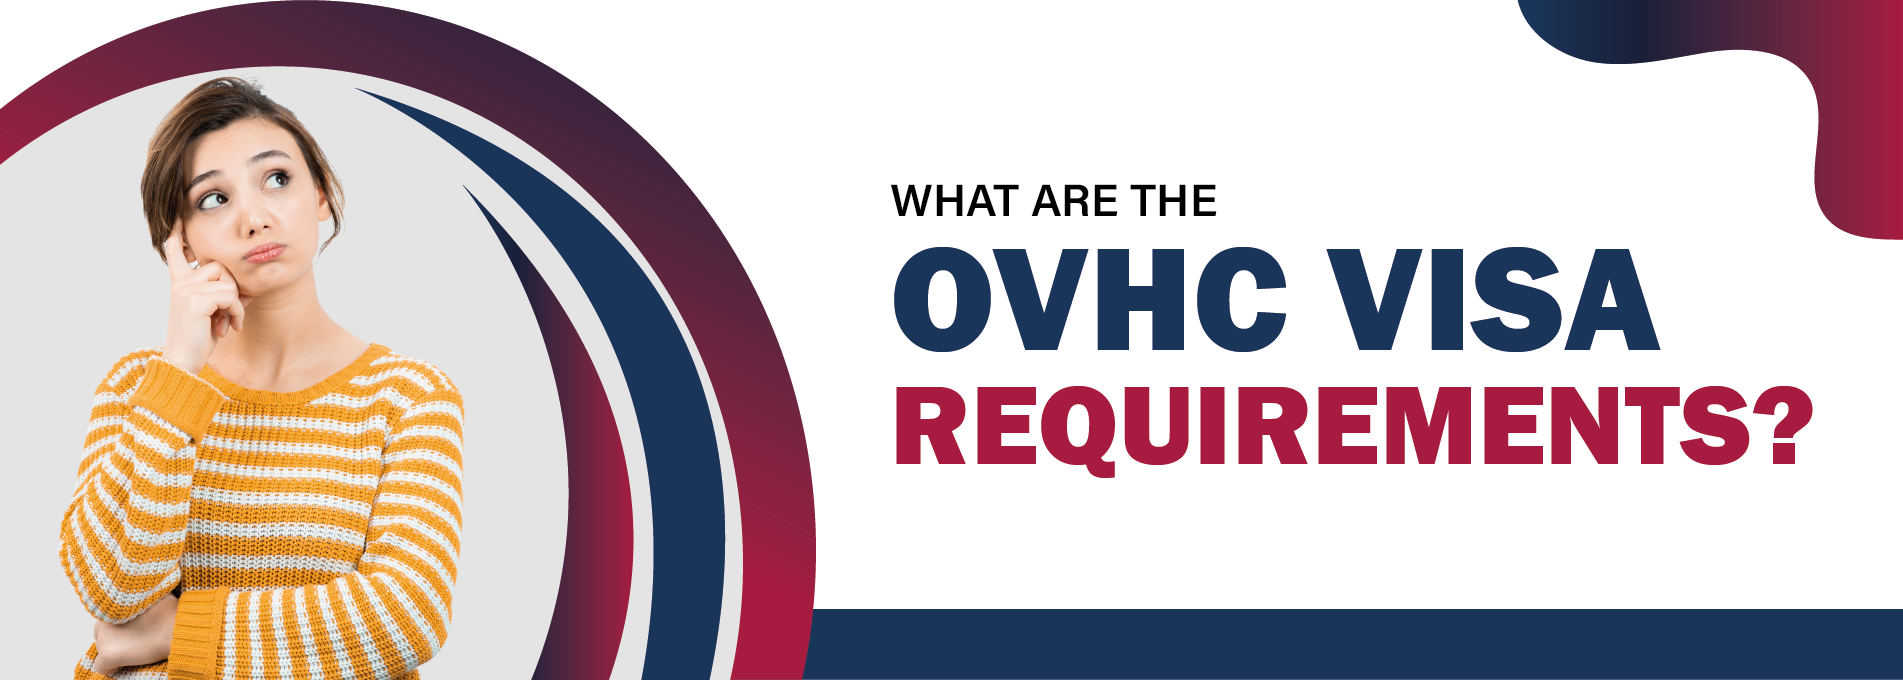 What are the OVHC Visa Requirements?